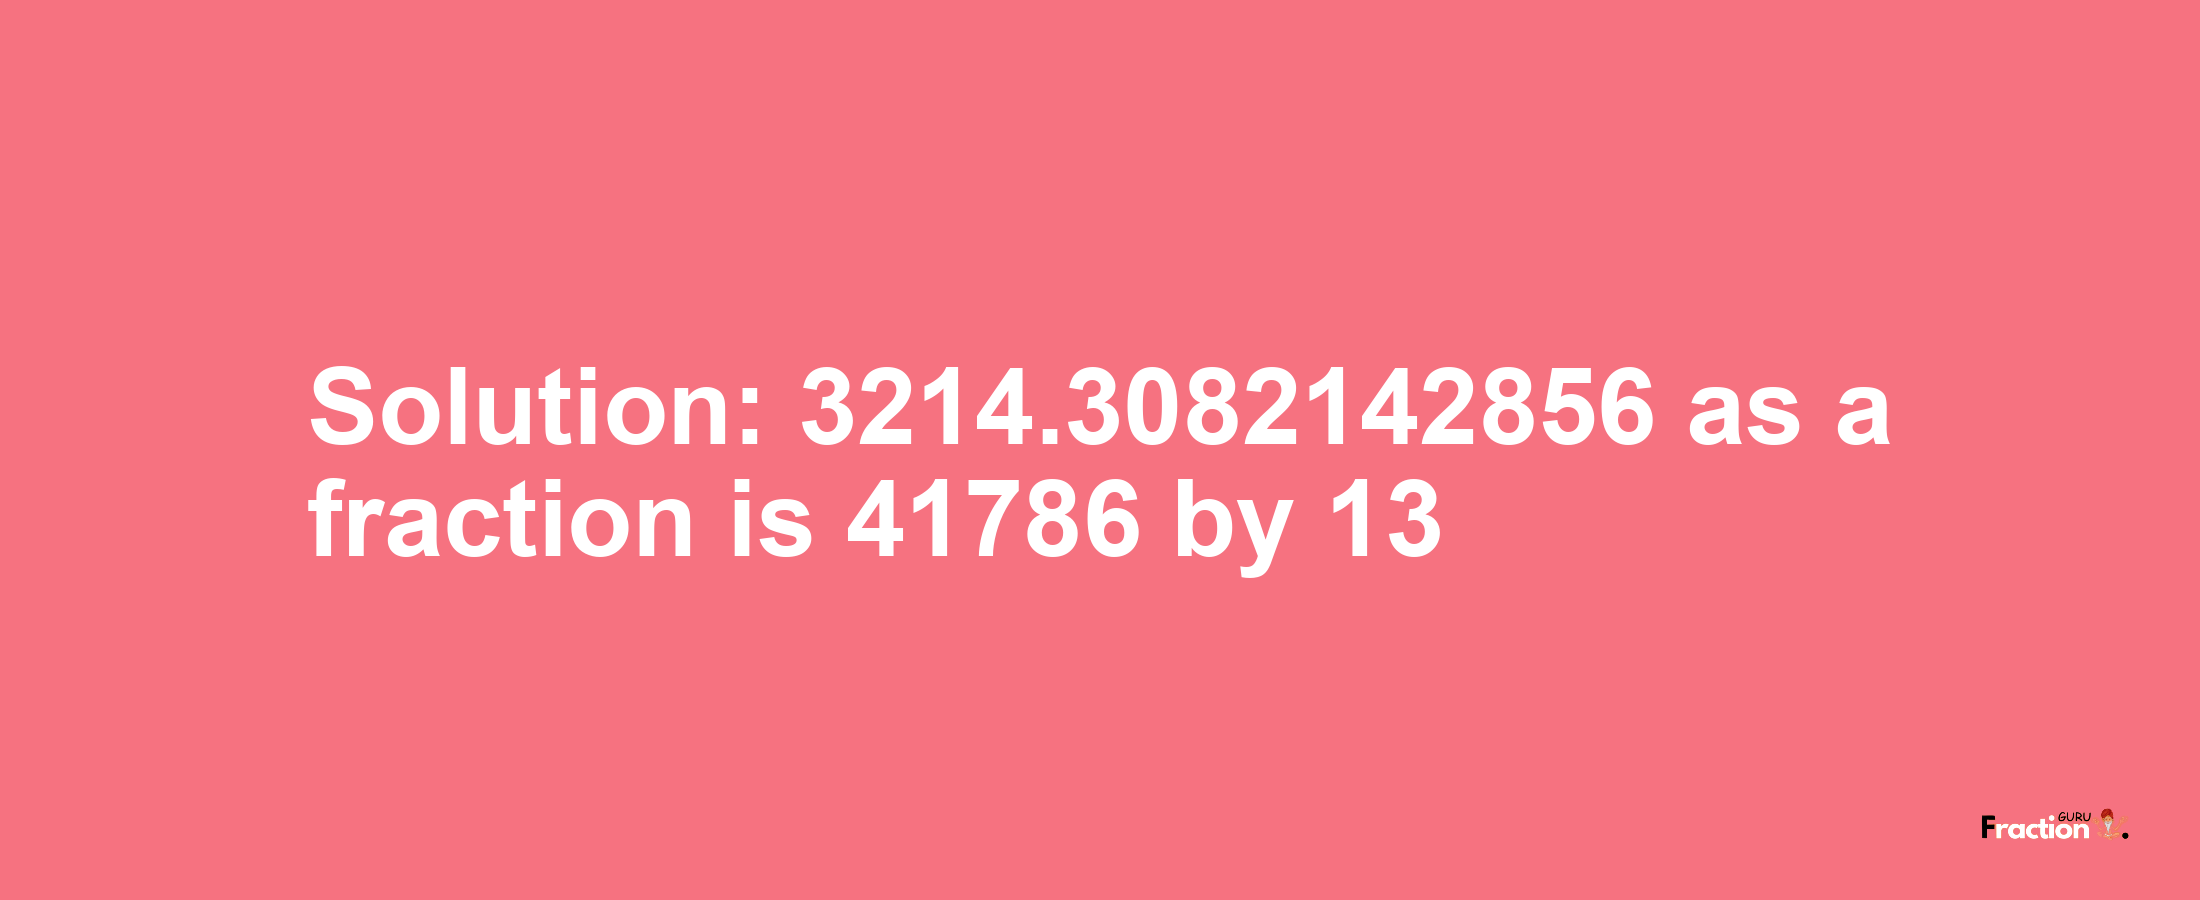 Solution:3214.3082142856 as a fraction is 41786/13